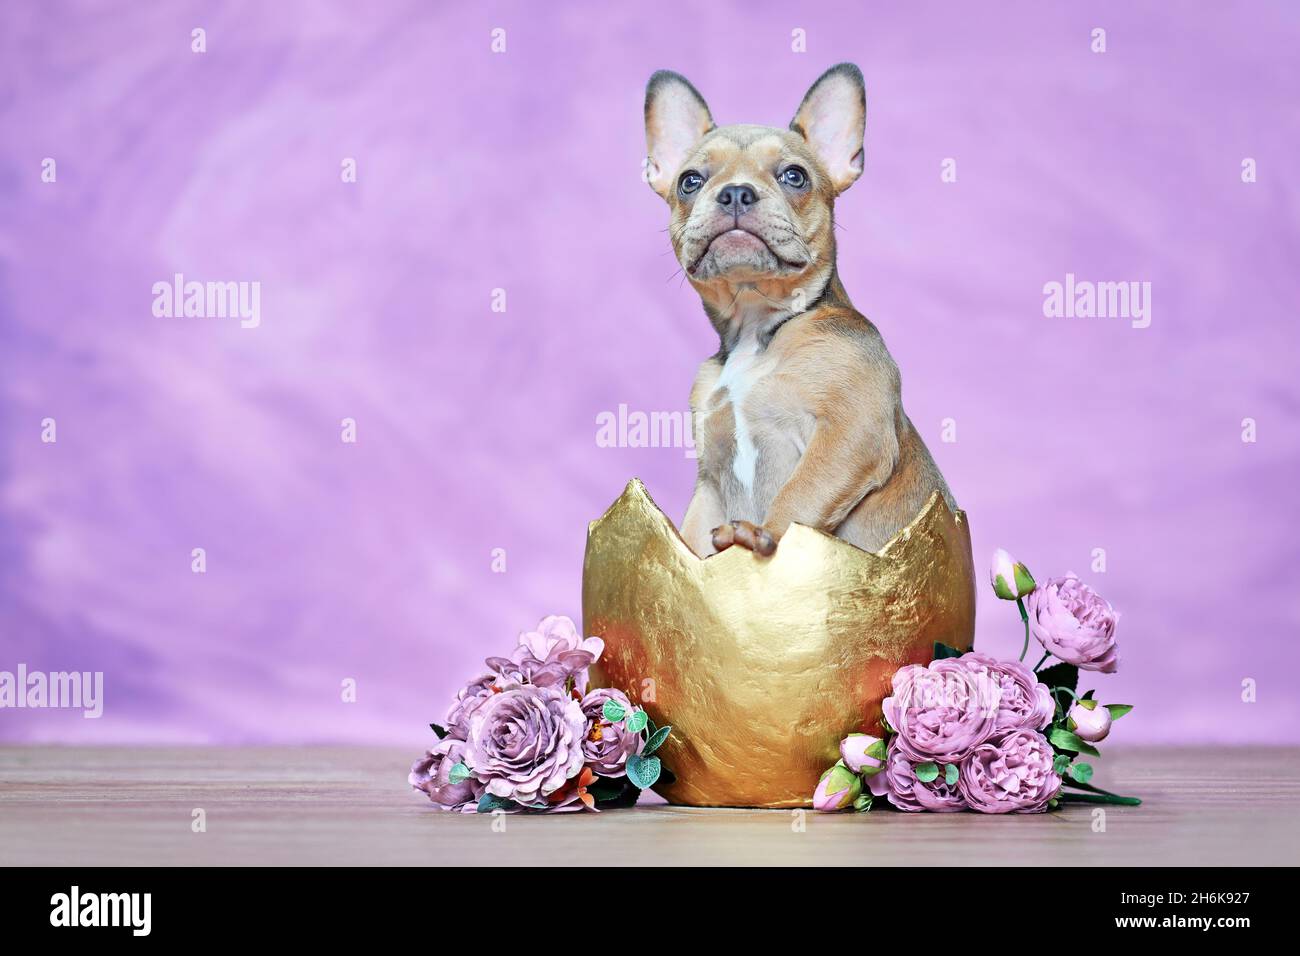 French Bulldog dog puppy hatching out of golden egg shell next to roses in front of pink wall Stock Photo